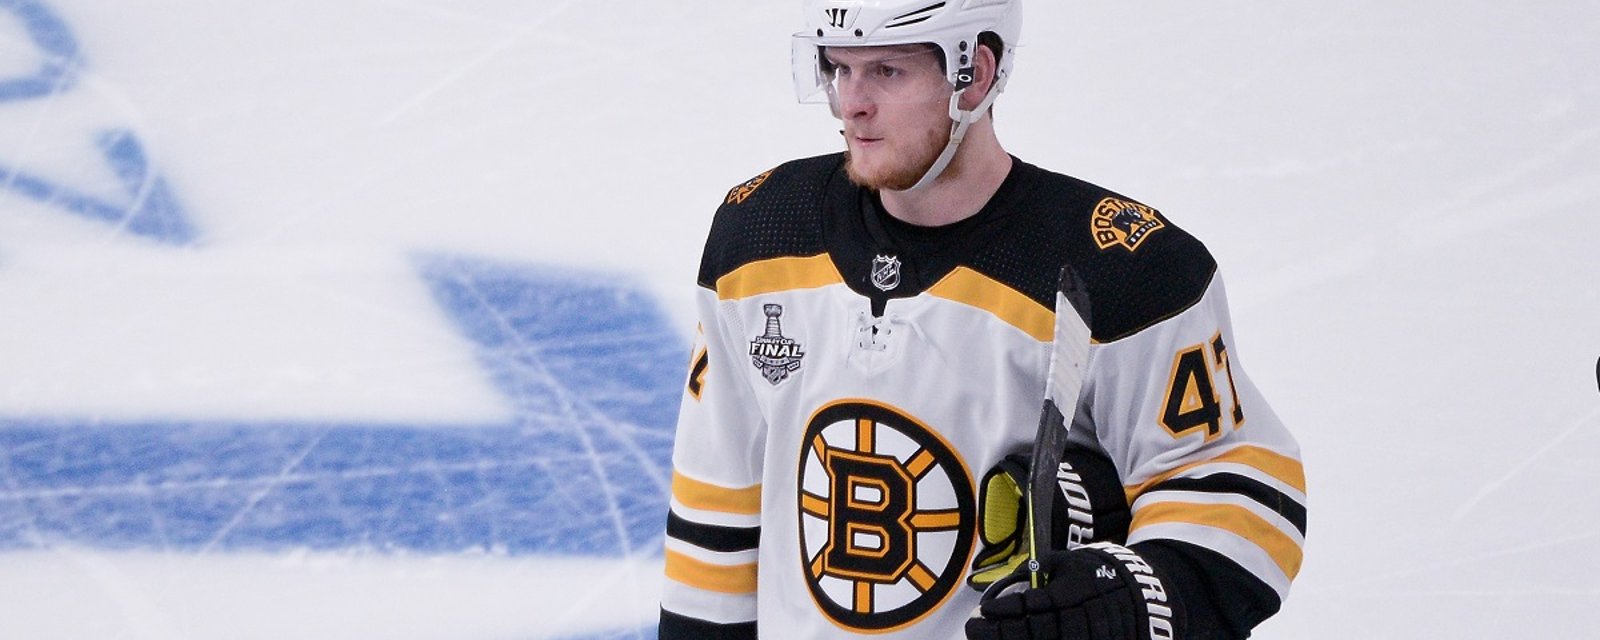 Torey Krug will make his return, but the Bruins lose another player to injury.